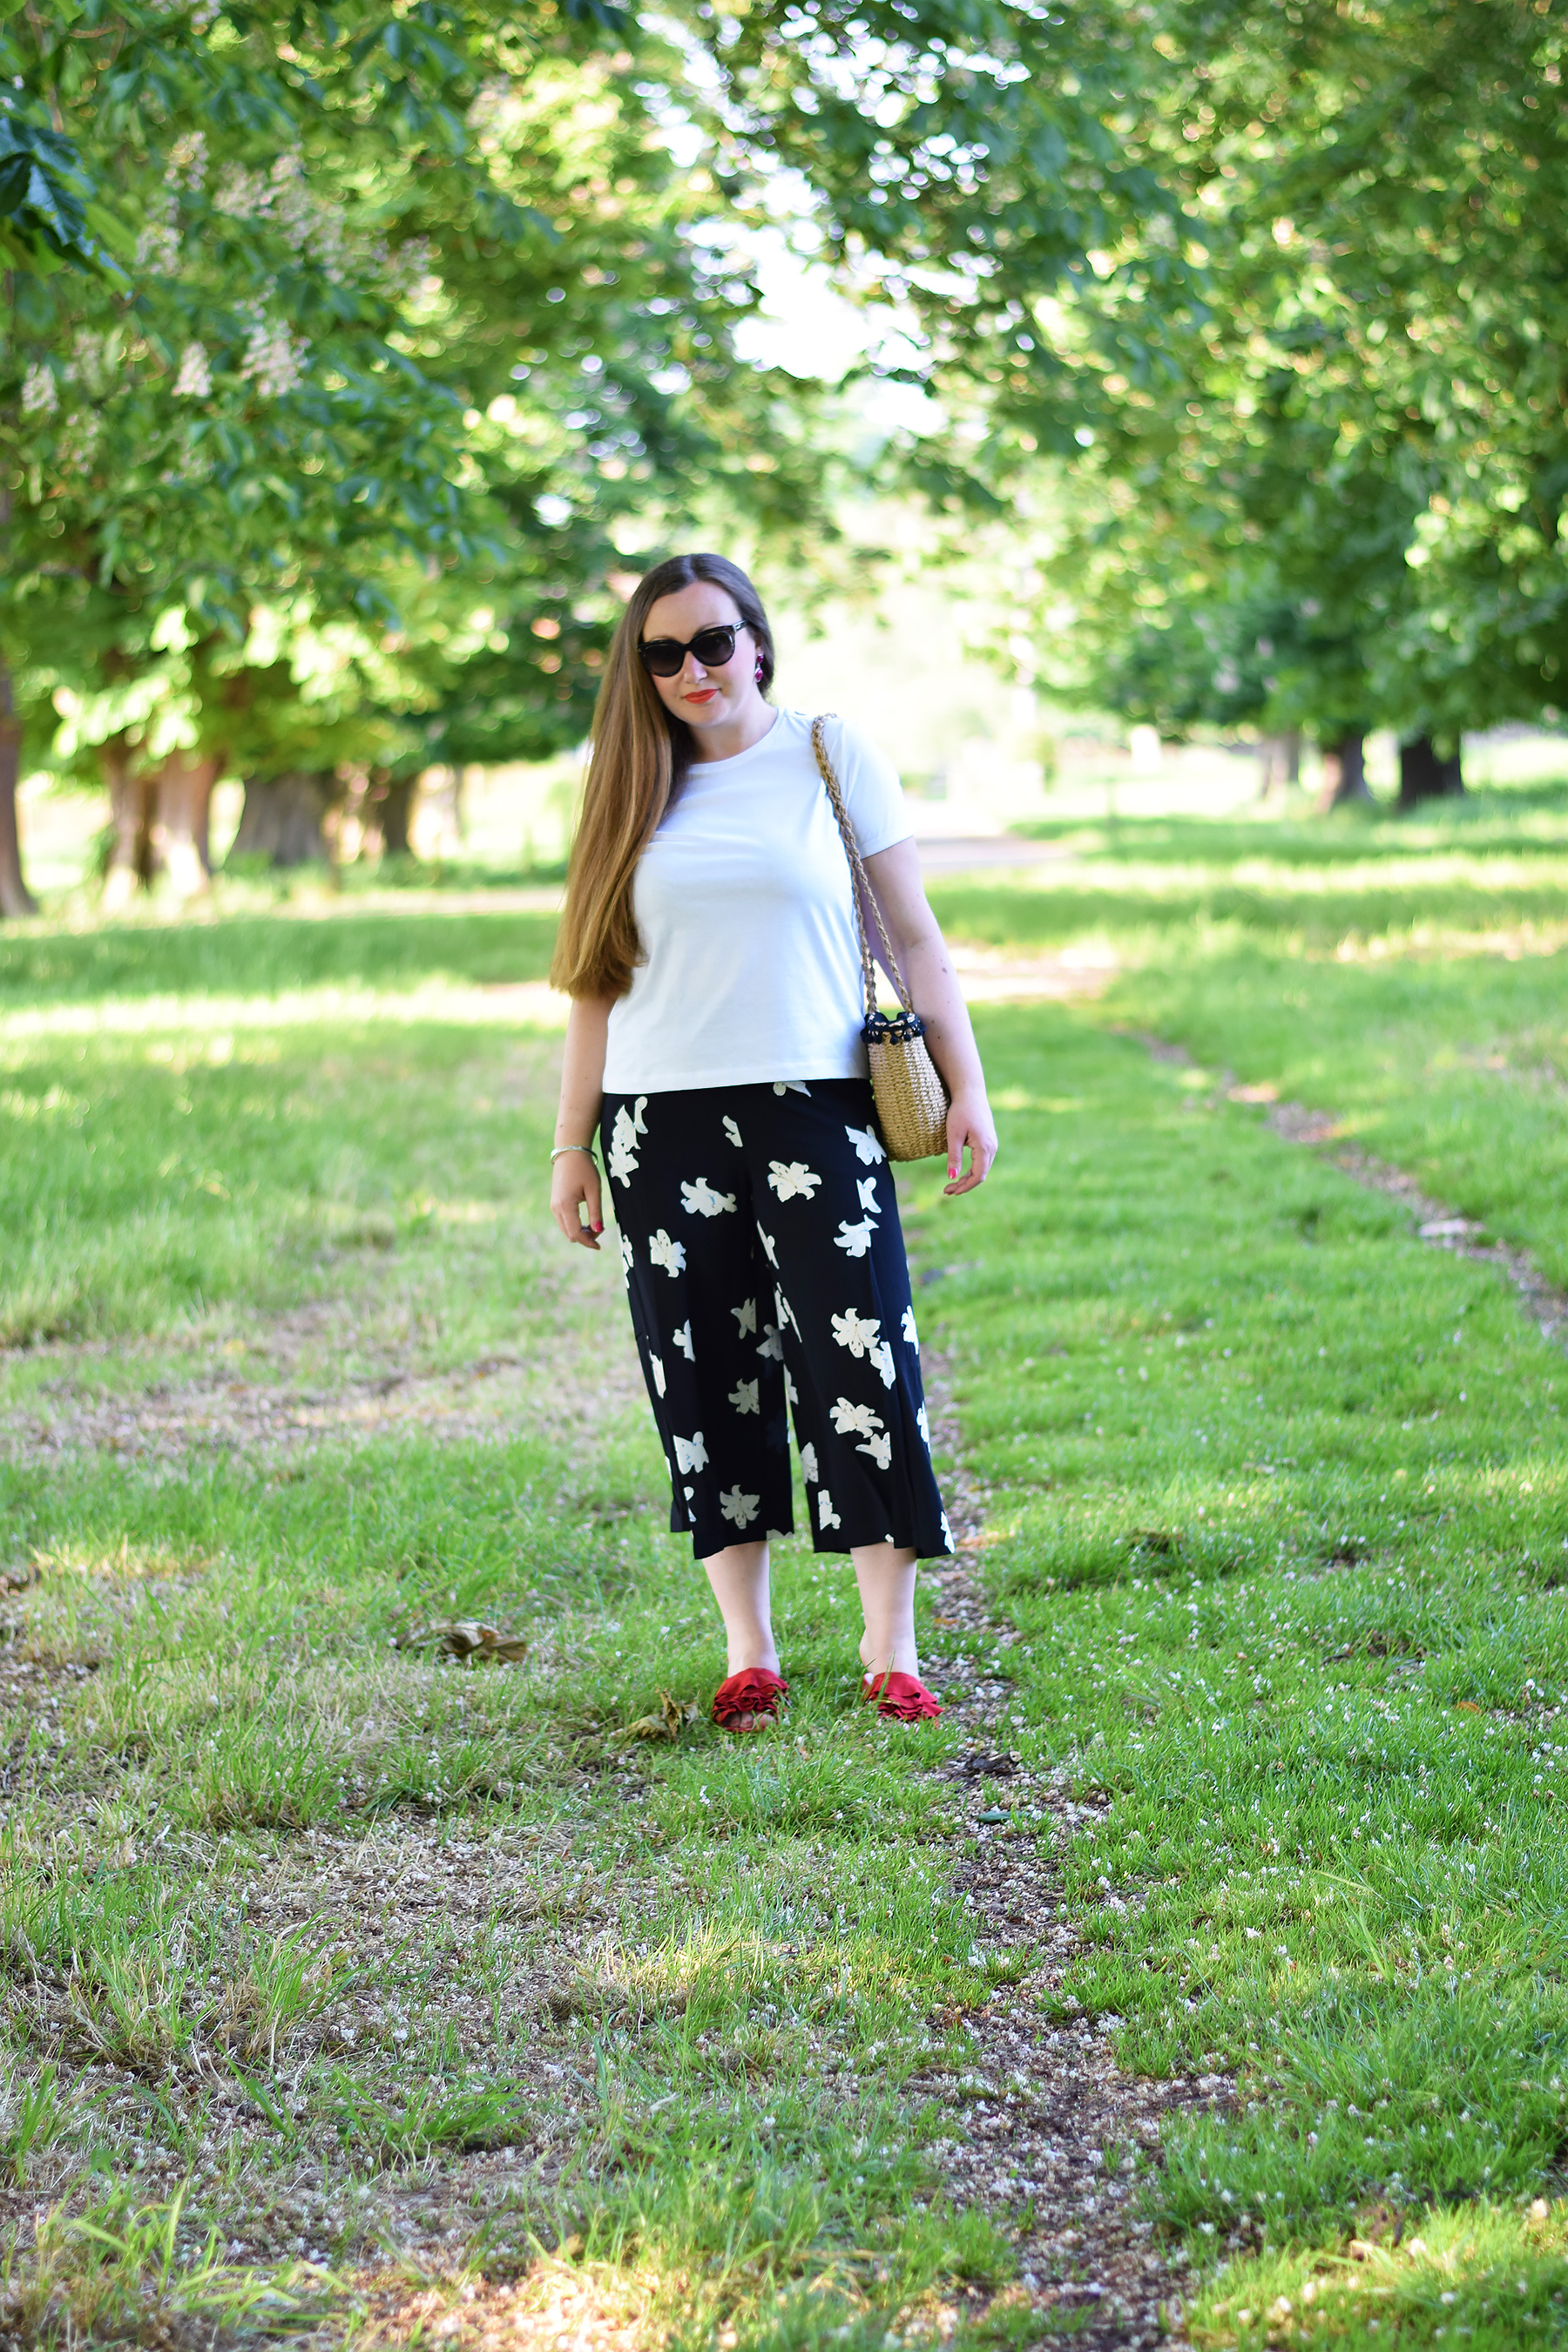 How to wear floral trousers in summer